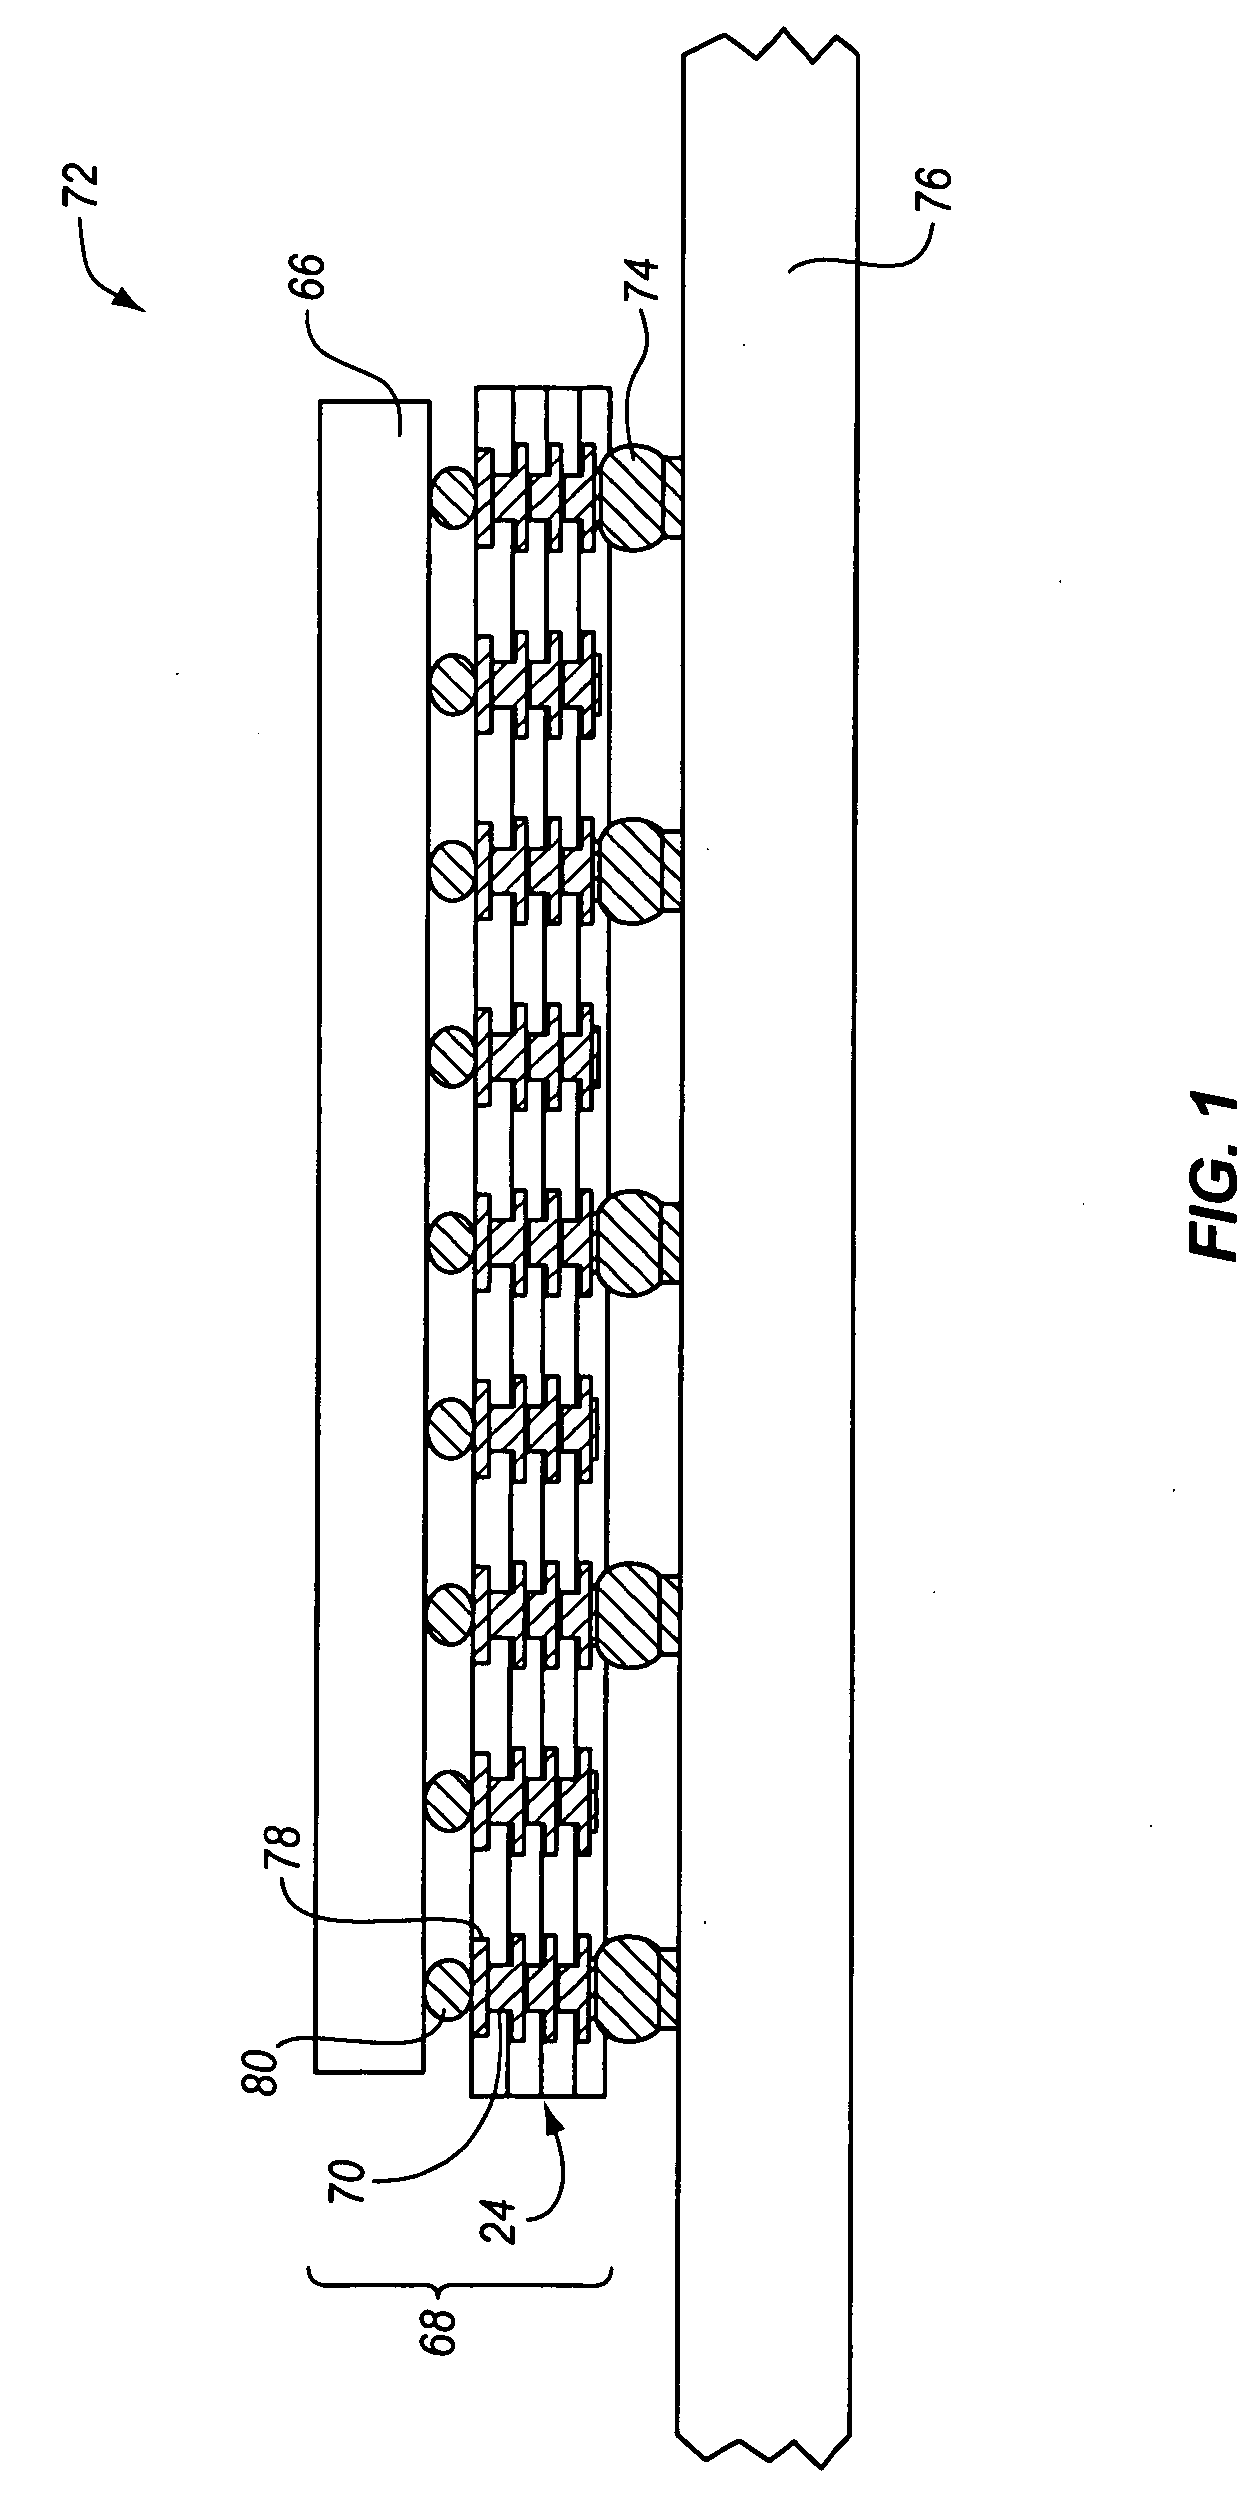 Coreless substrate package with symmetric external dielectric layers